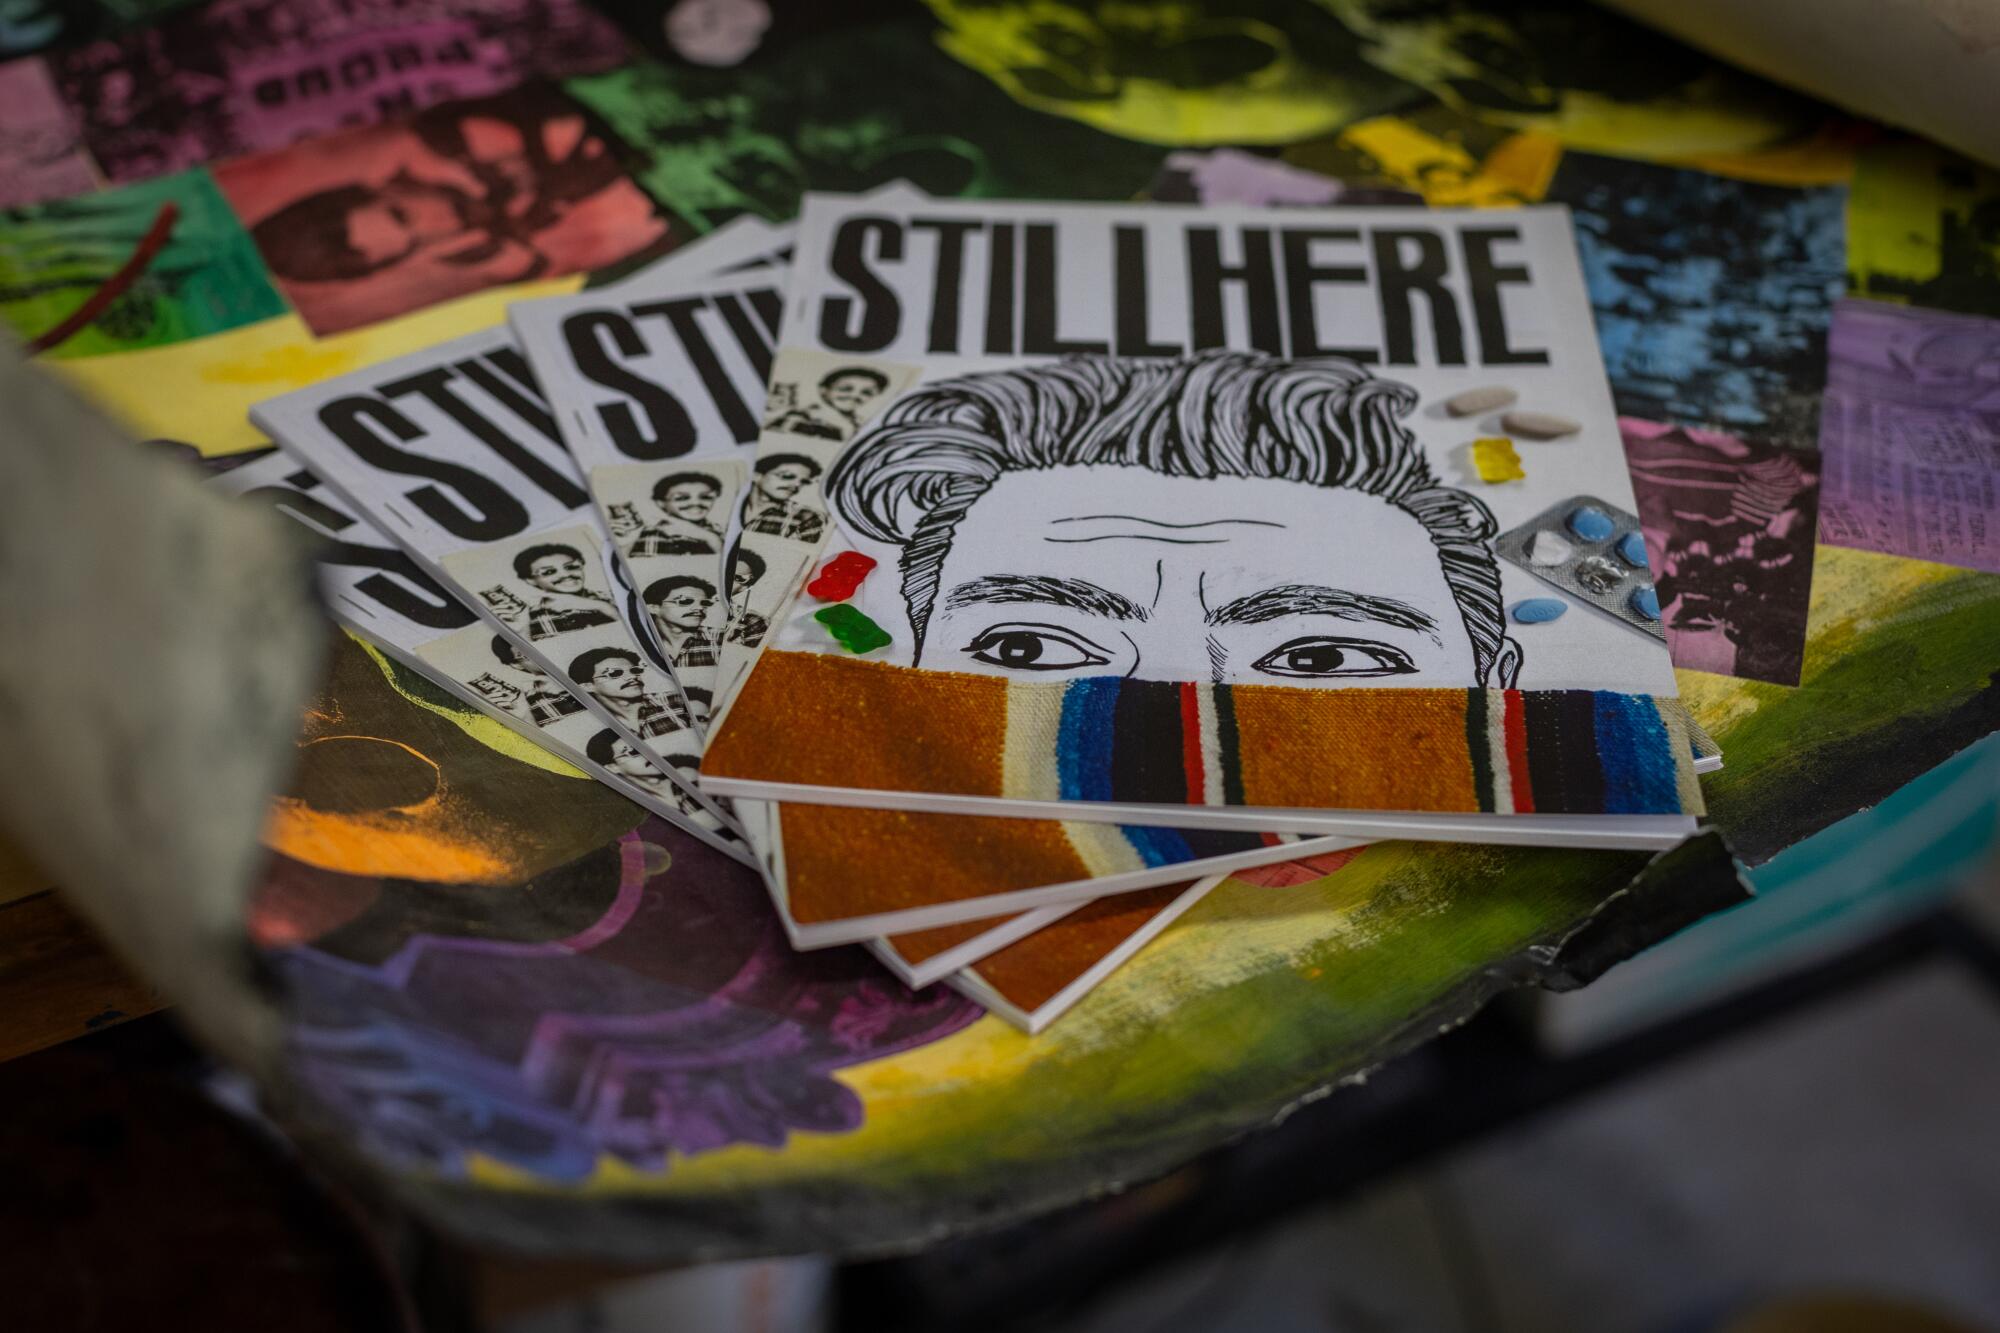 A stack of zines titled "STILL HERE" show a drawing of the top of a man's face obscured by a Mexican serape.